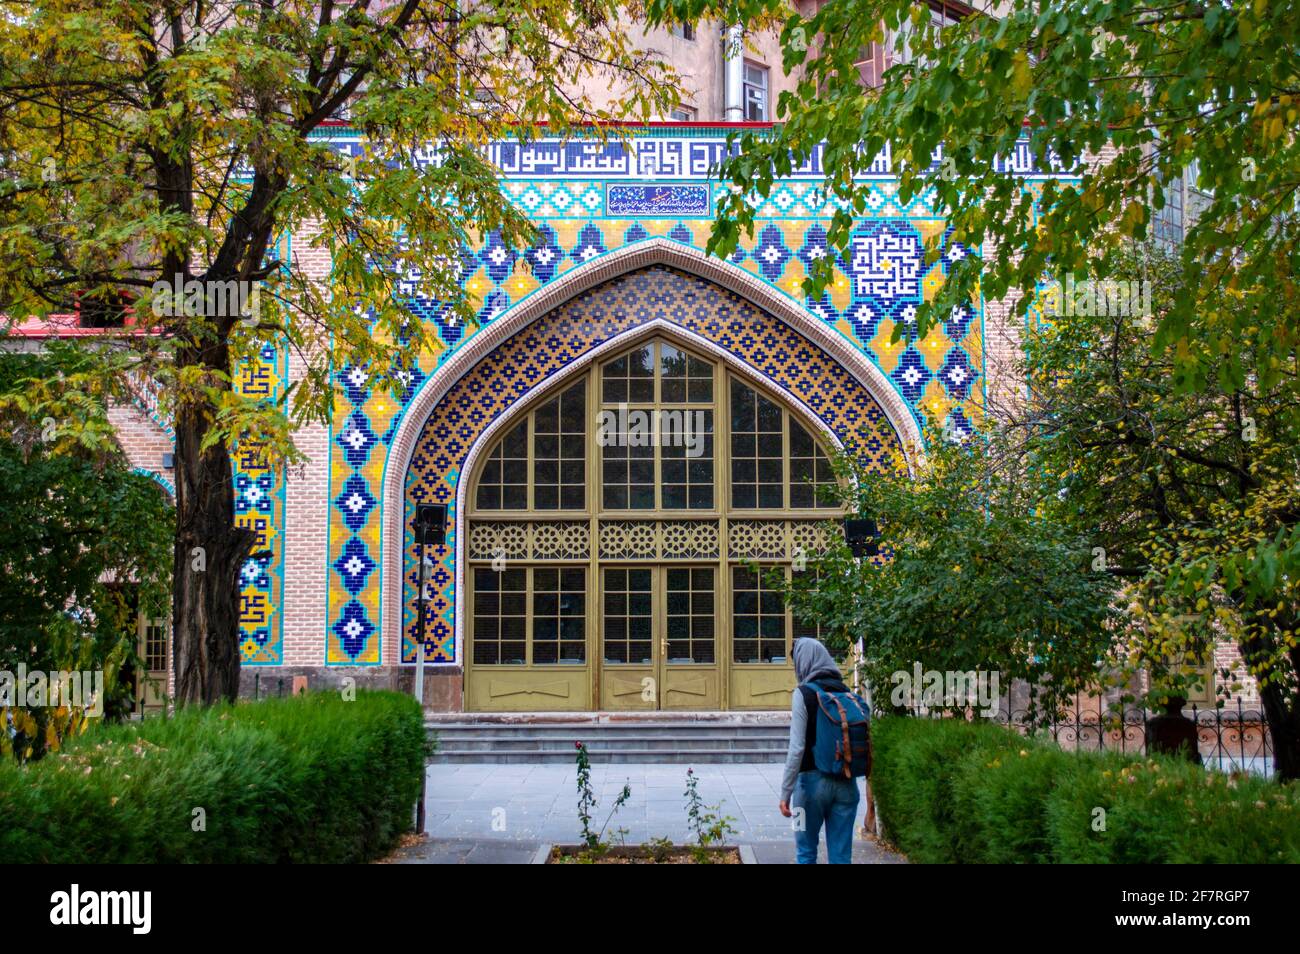 The courtyard of the Blue Mosque in the city of Yerevan, Armenia Stock Photo